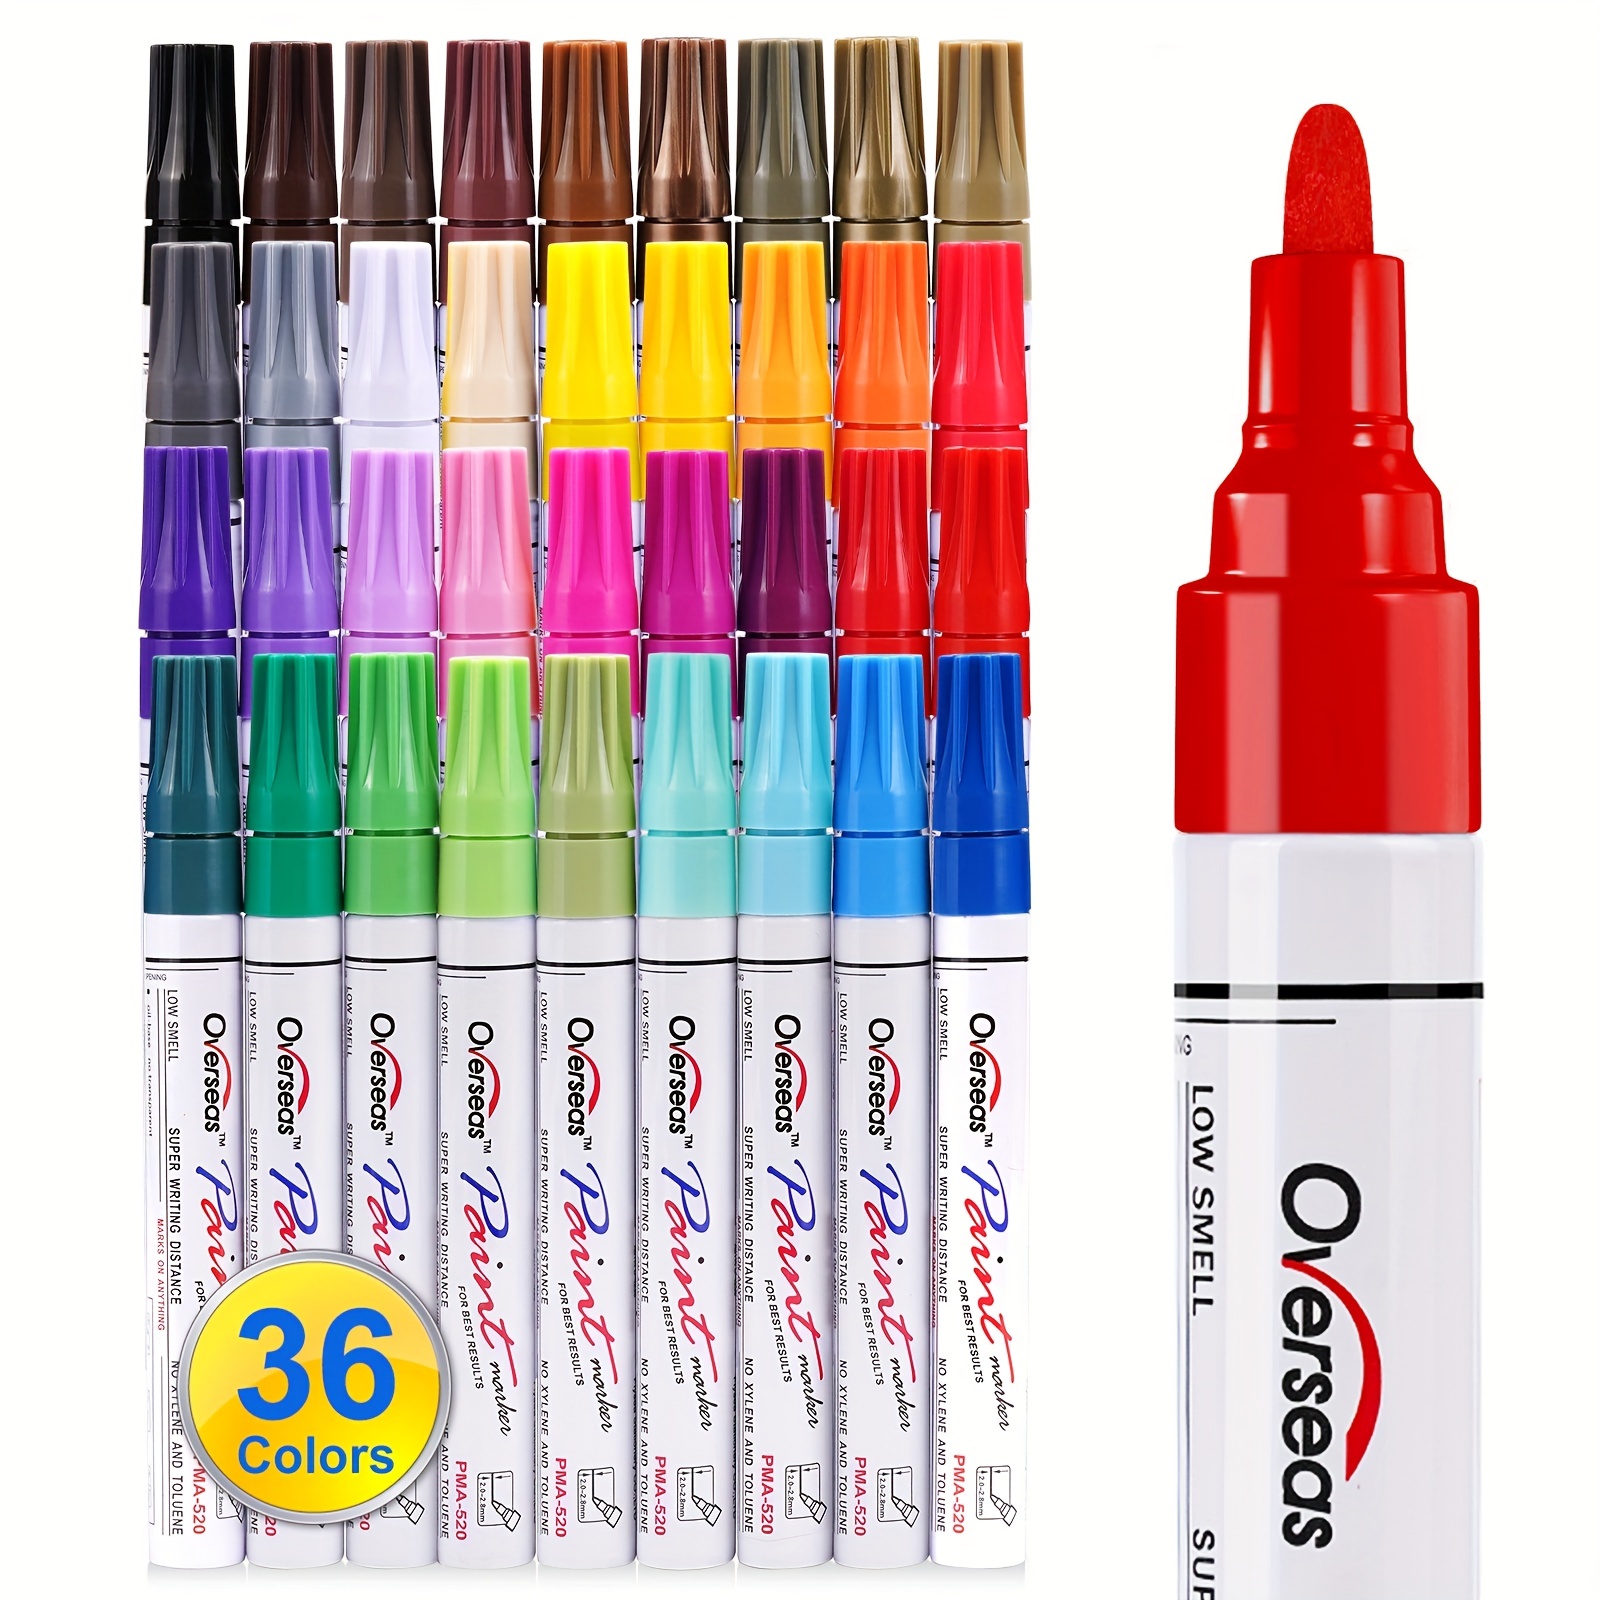 Sharpie Oil-Based Paint Markers, Medium Point, Assorted & Metallic Colors, 5 Count - Great for Rock Painting